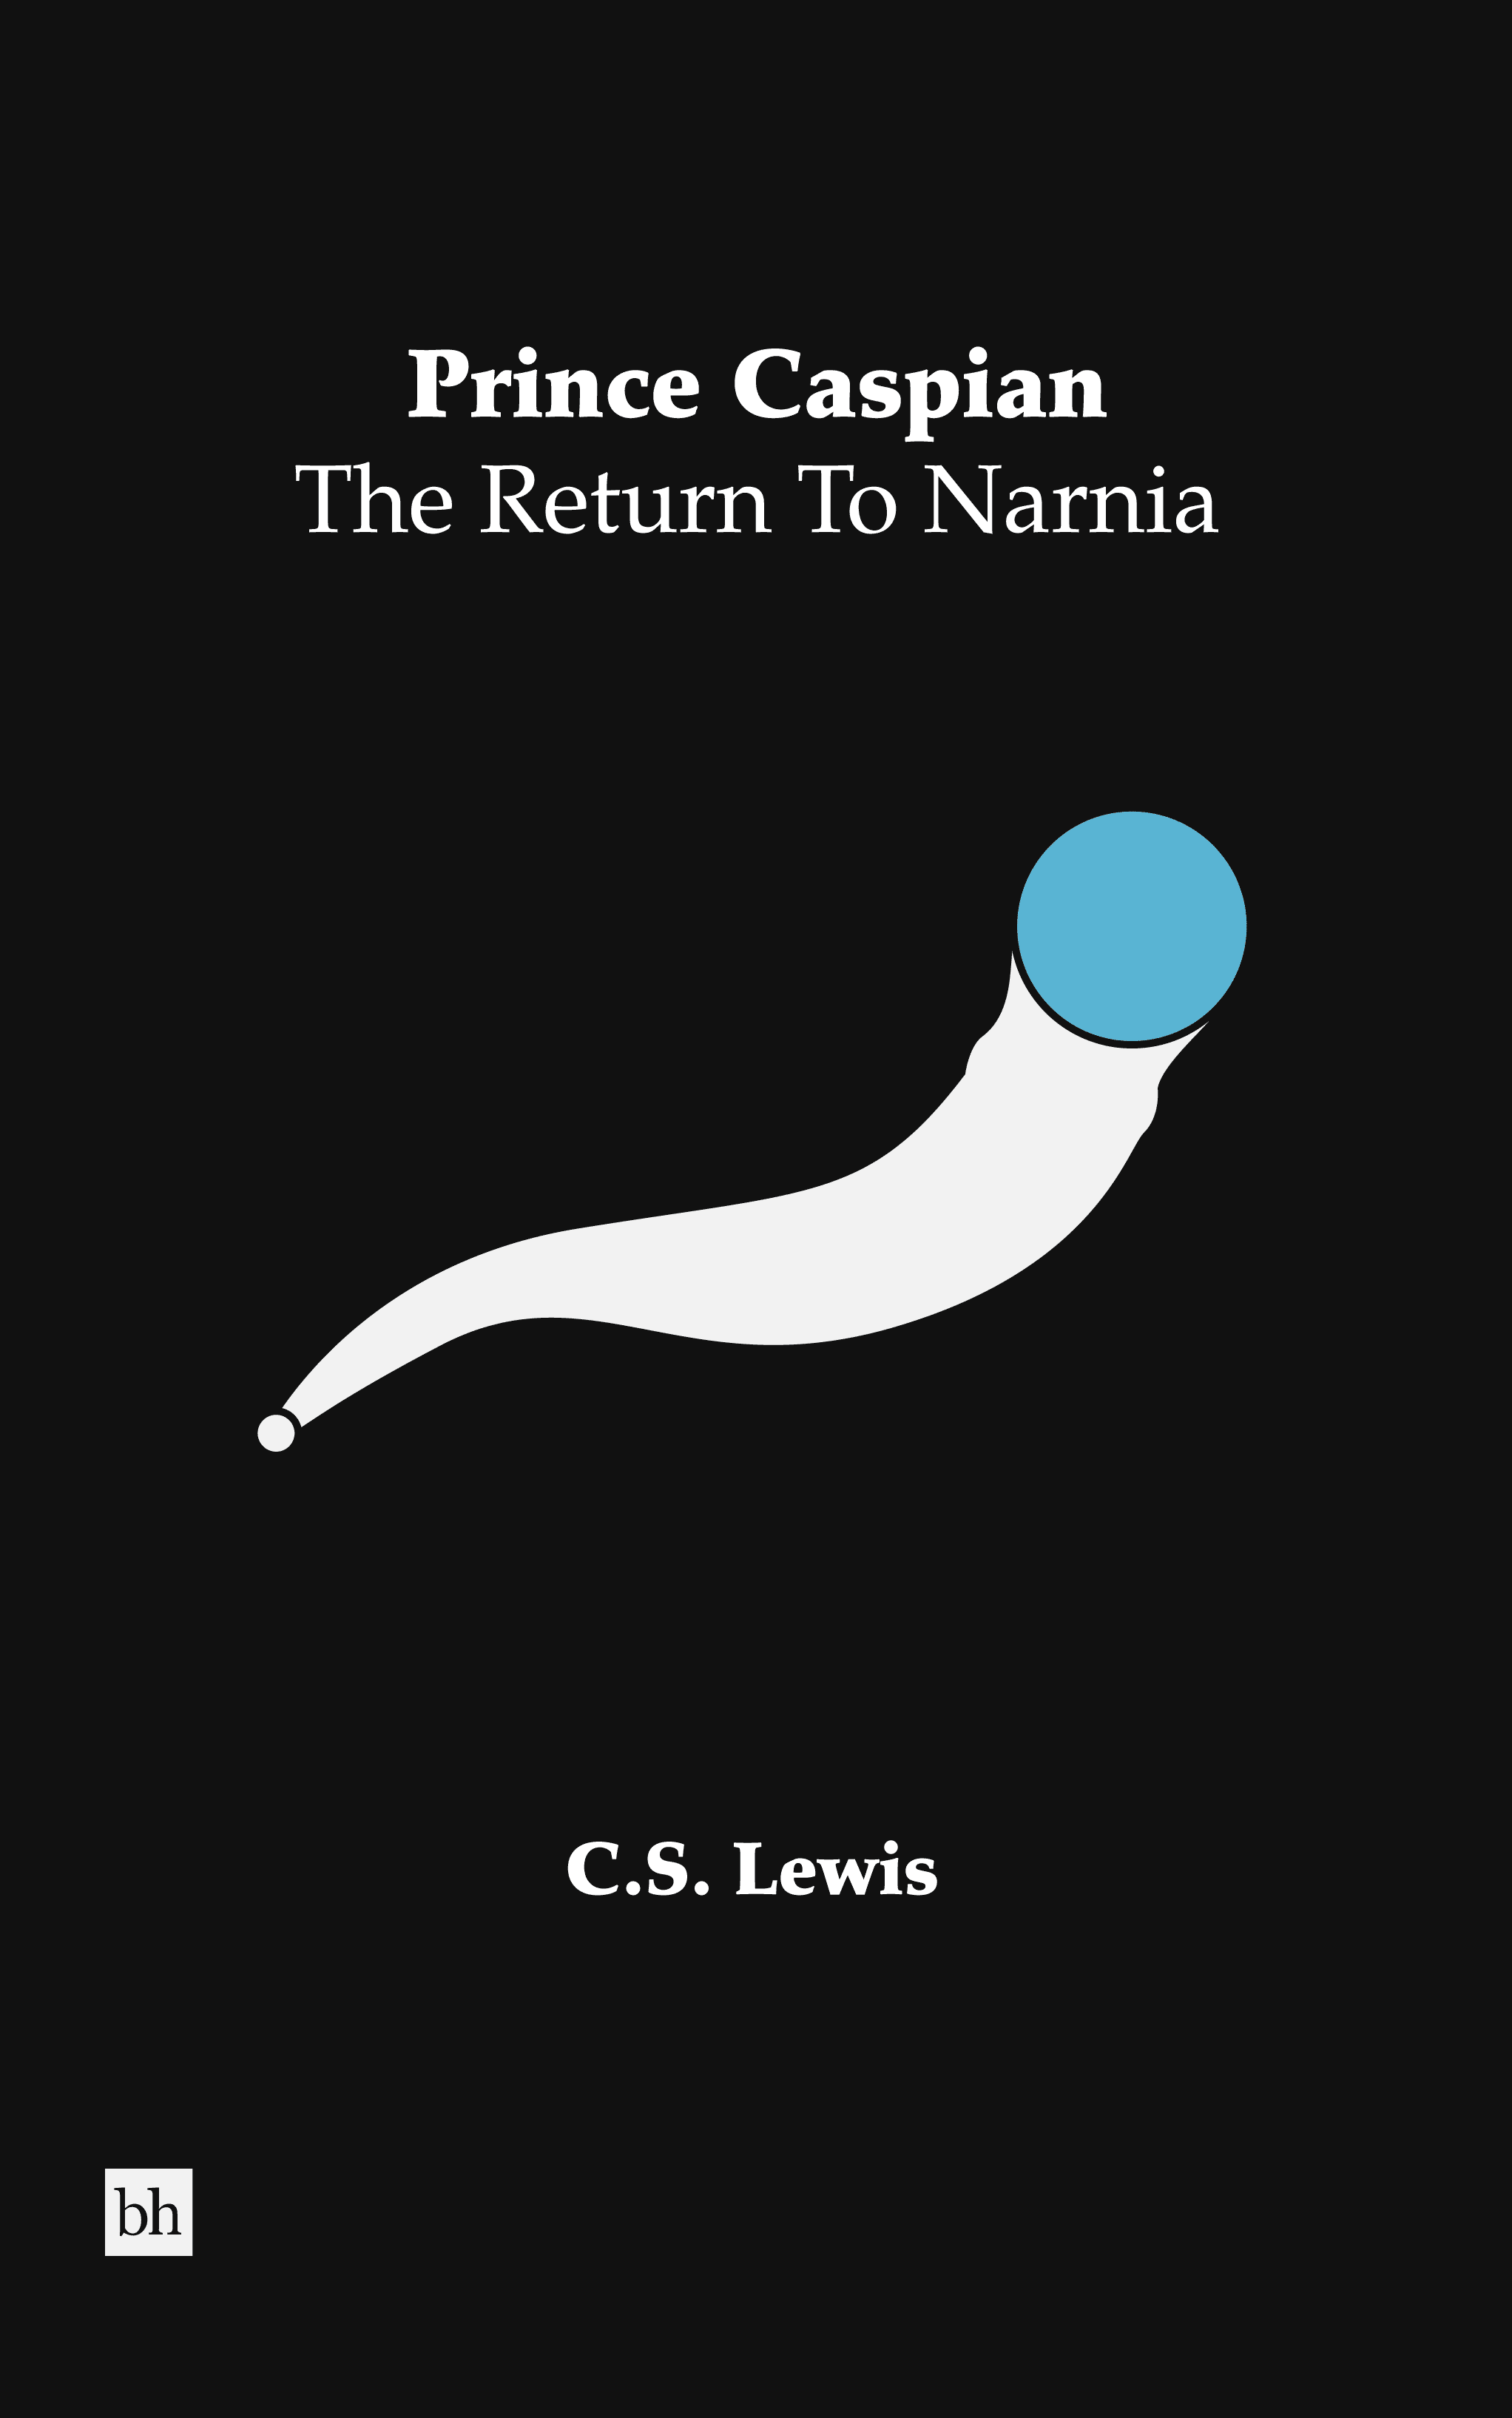 Book cover mock thumbnail for Prince Caspian: The Return To Narnia